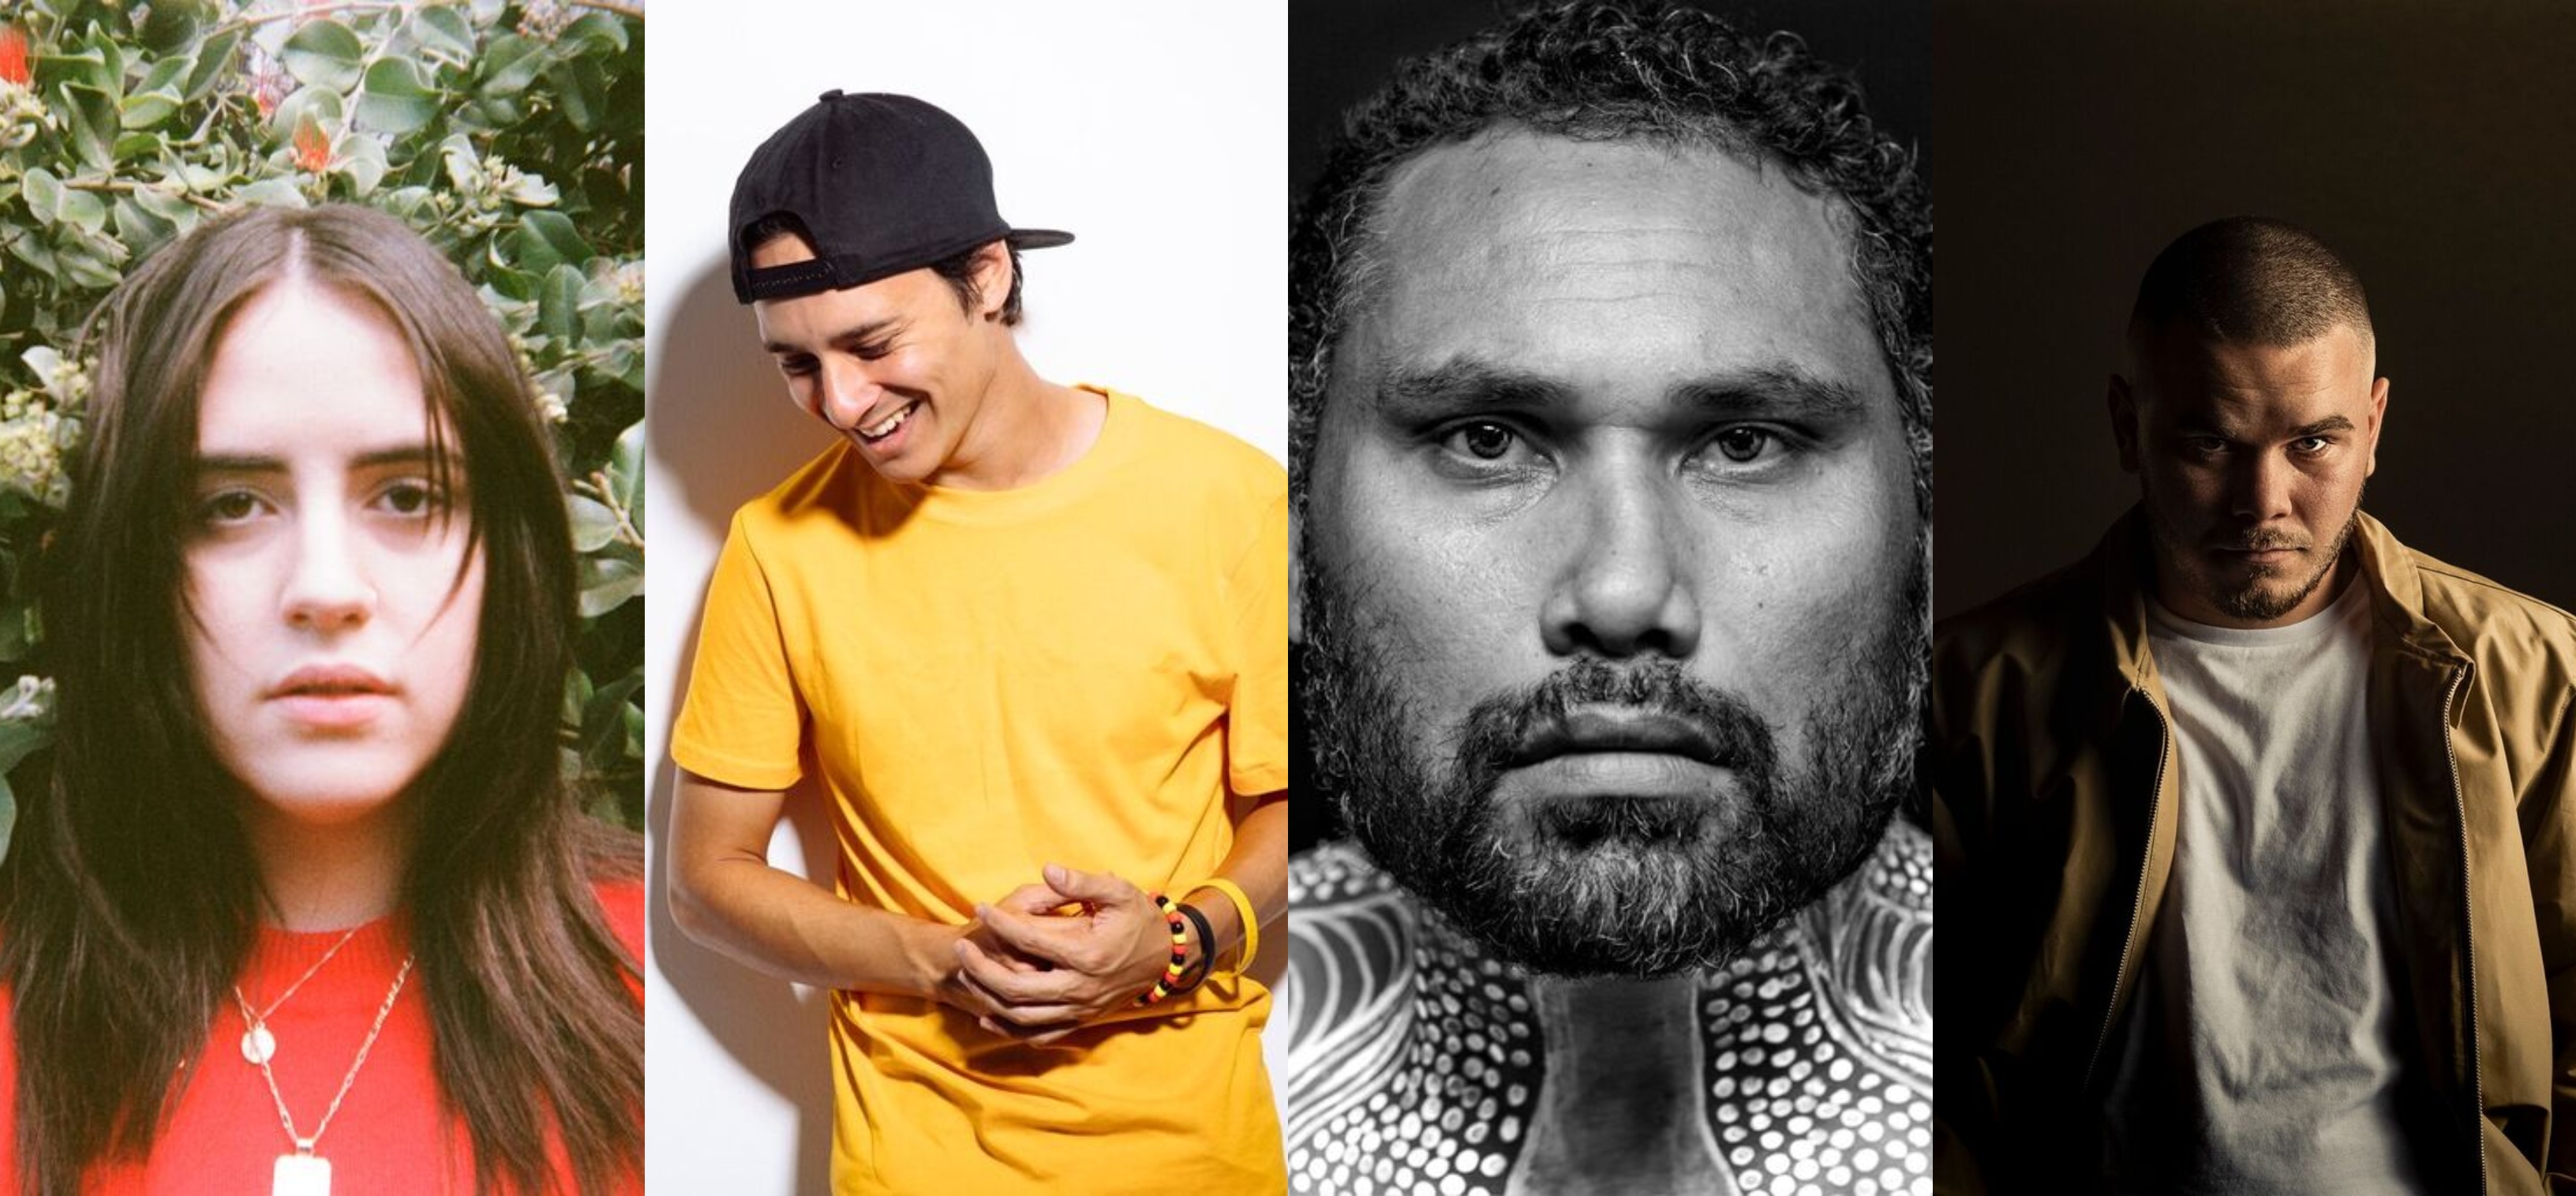 Sydney Opera House & Airbnb team up for First Nations concert series: “new songmen and songwomen who still walk in ancient footprints”